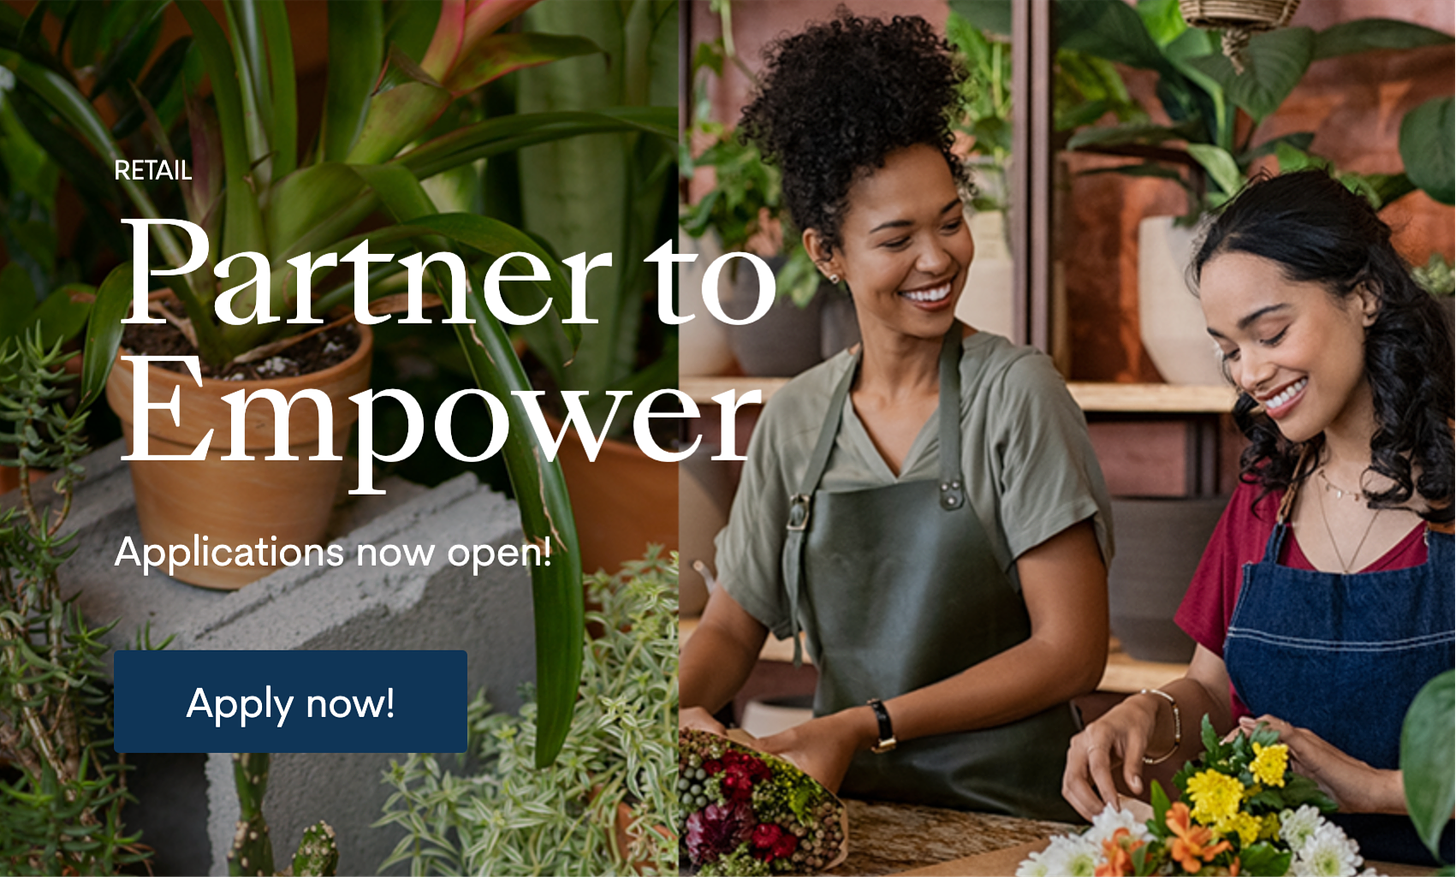 Two pictures: one is a picture of a plant on a gray brick surrounded by other plants, and the other is a picture of two women putting together bouquets in a flower shop. The picture has "Partner to Empower" on it and a call to action for people to apply now.